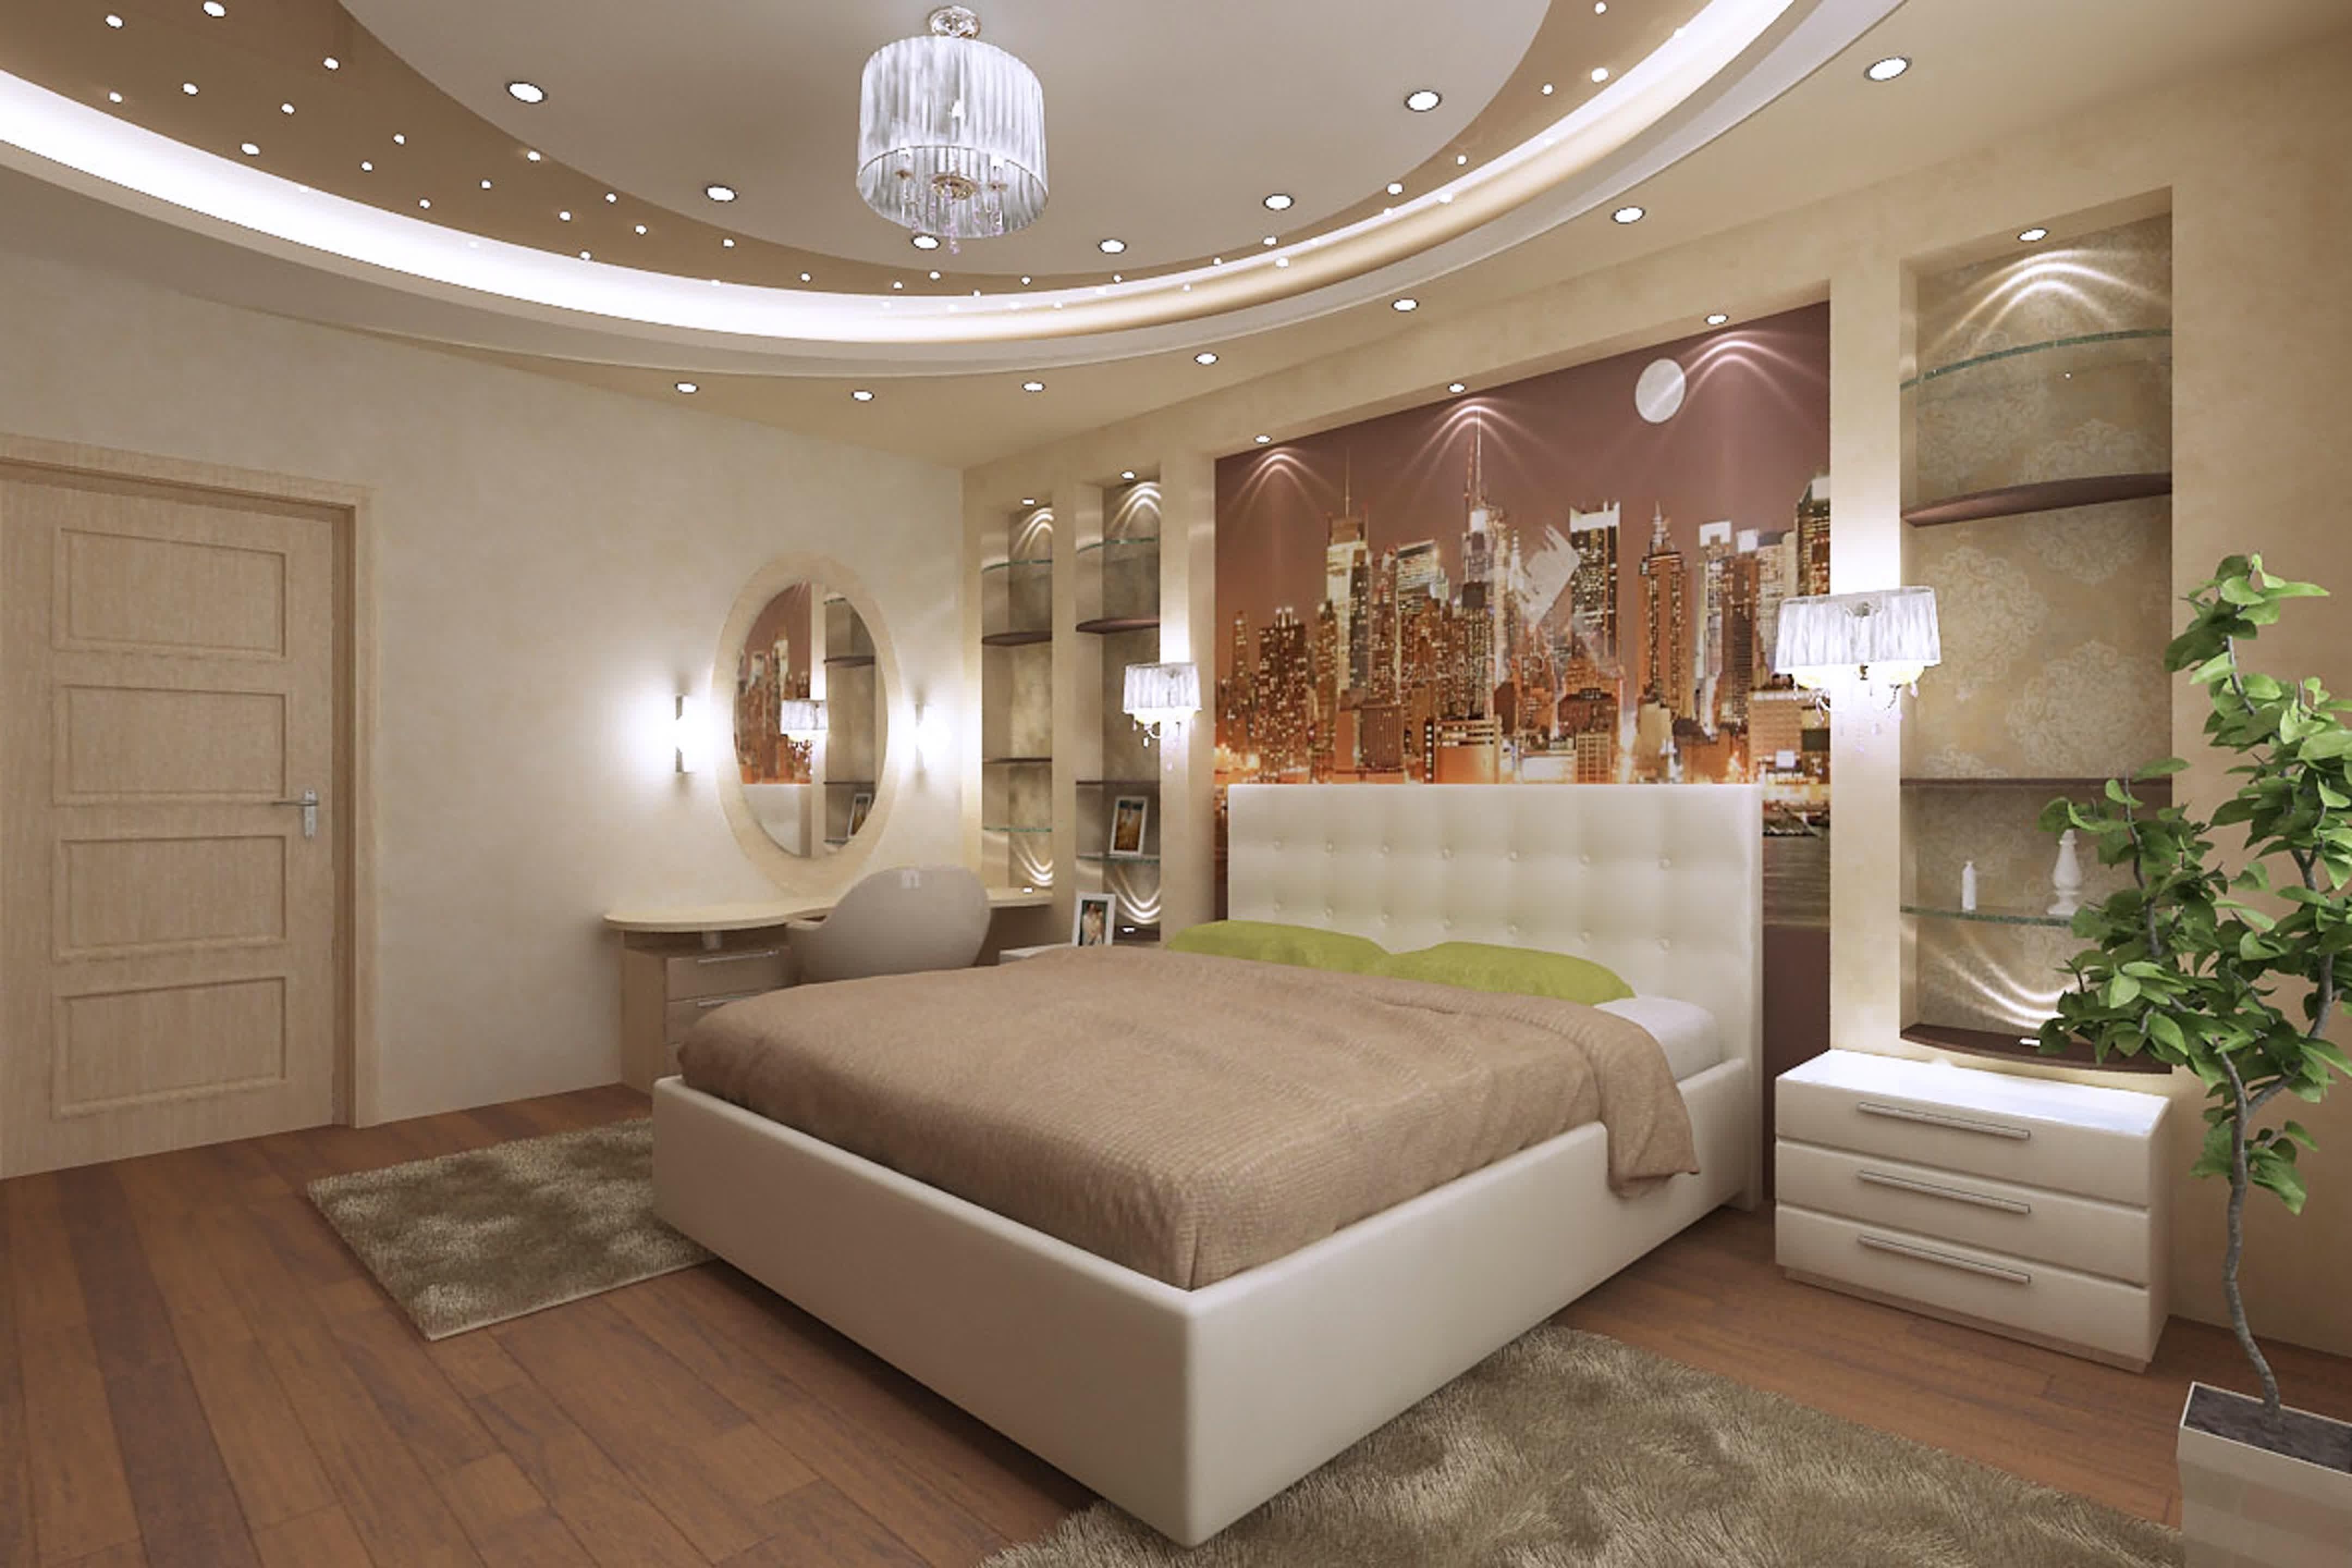 20 Ideas of Ceiling Mirrors for Bedroom | Mirror Ideas